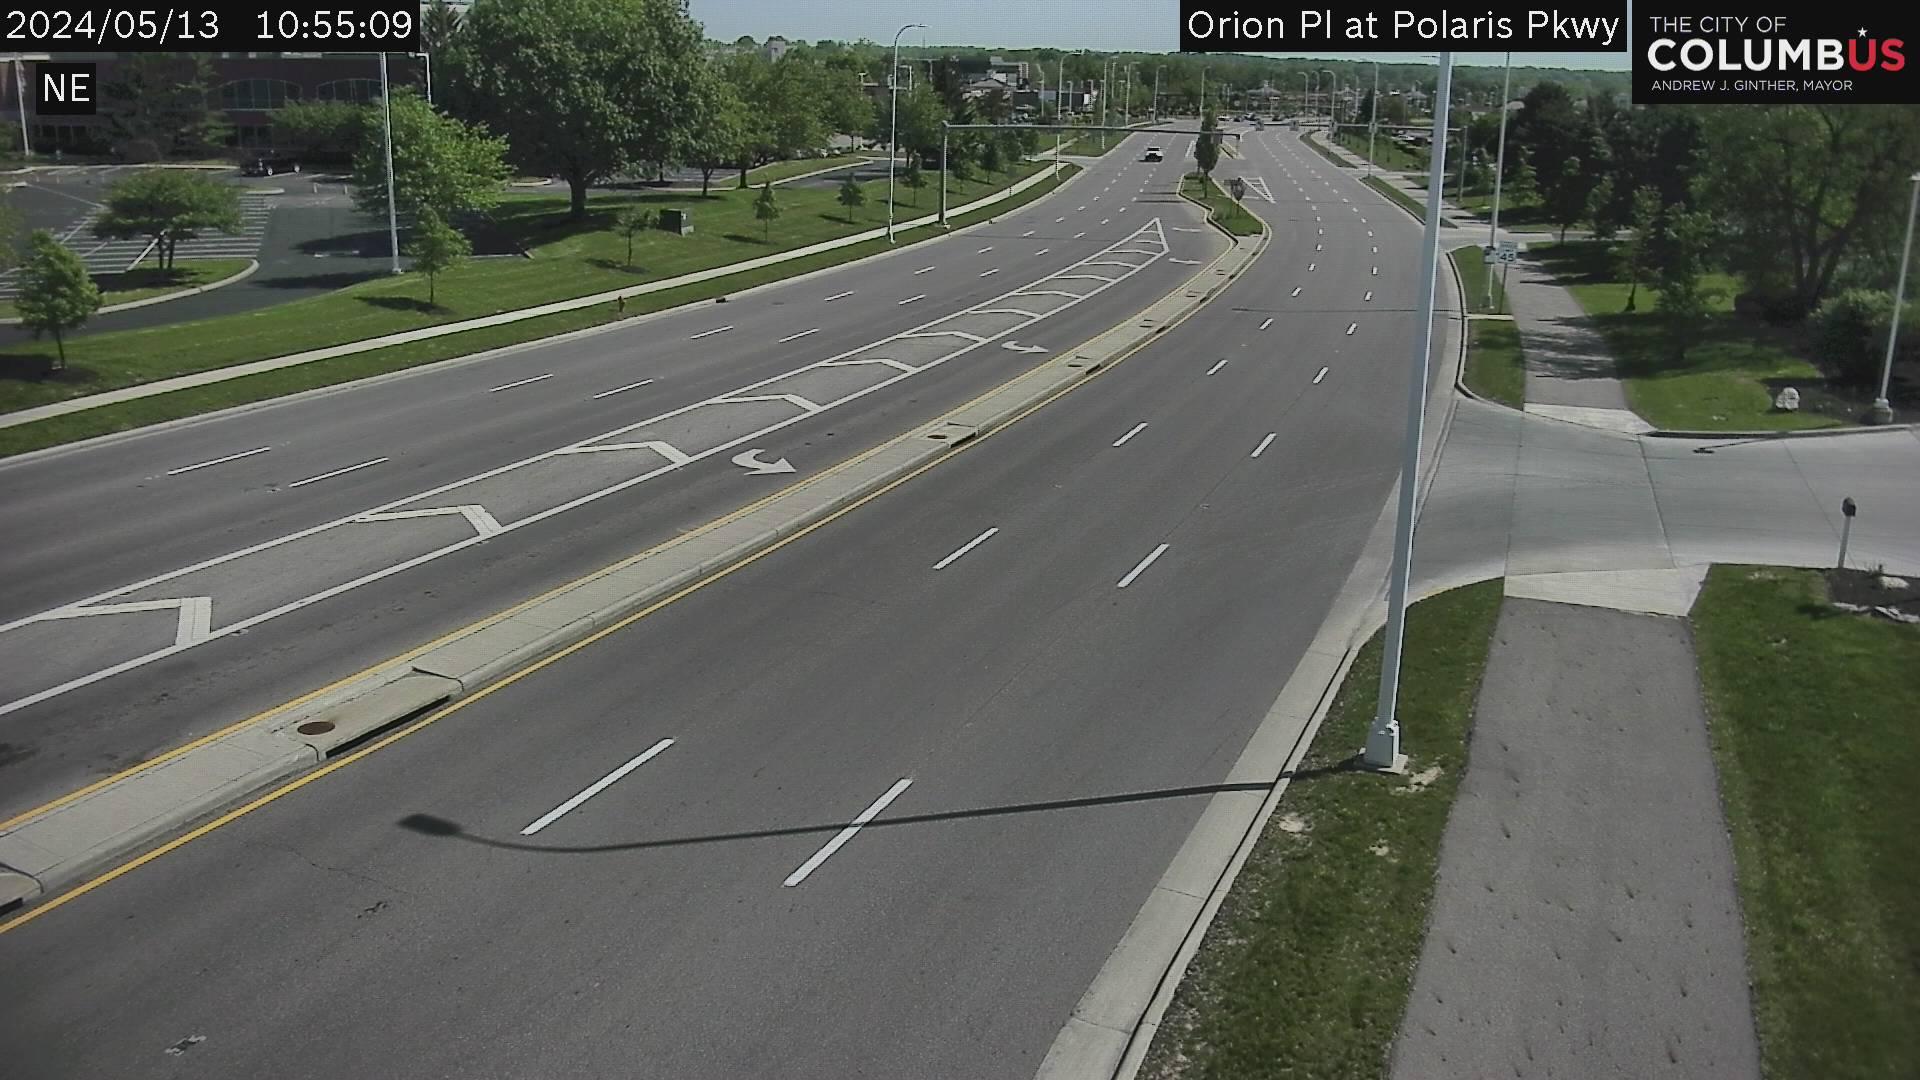 Traffic Cam Westerville: City of Columbus) Polaris Pkwy at Orion Pl